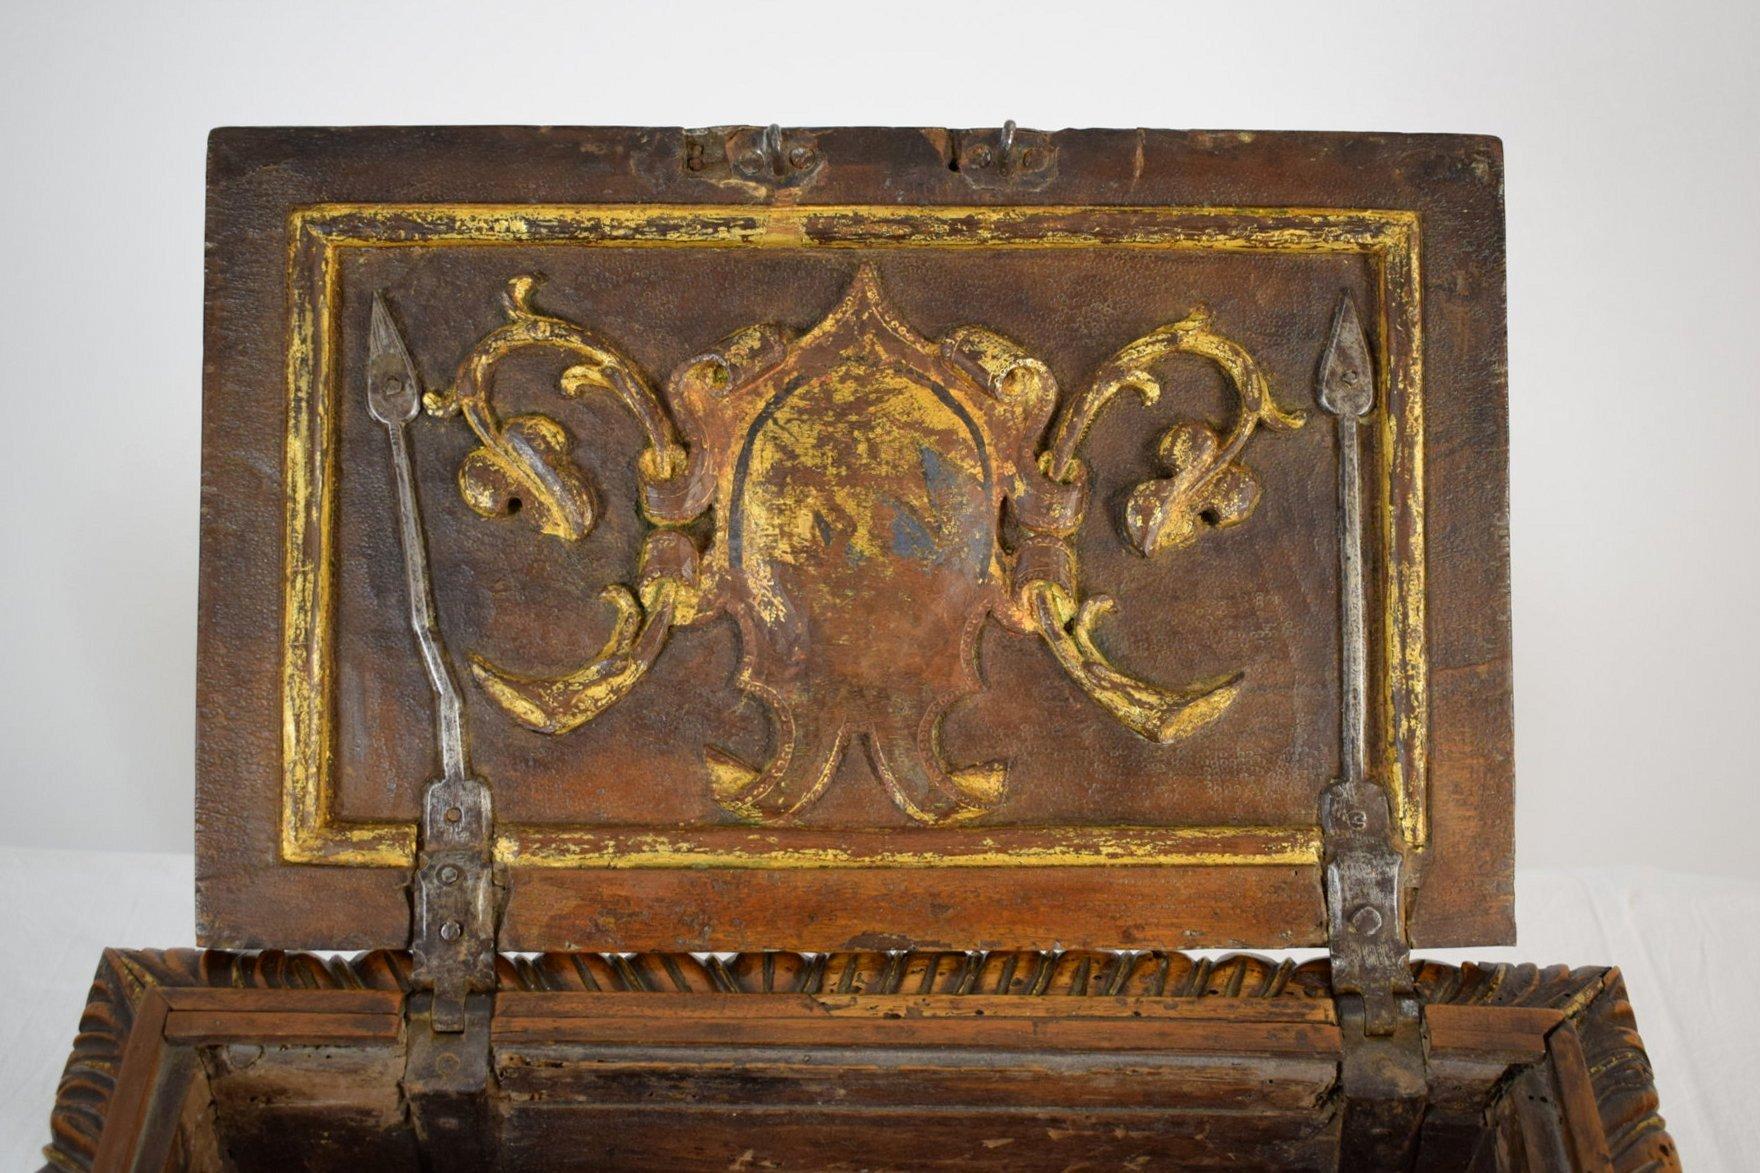 Renaissance 16th Century Tuscany Carved and Gilded Wood Box